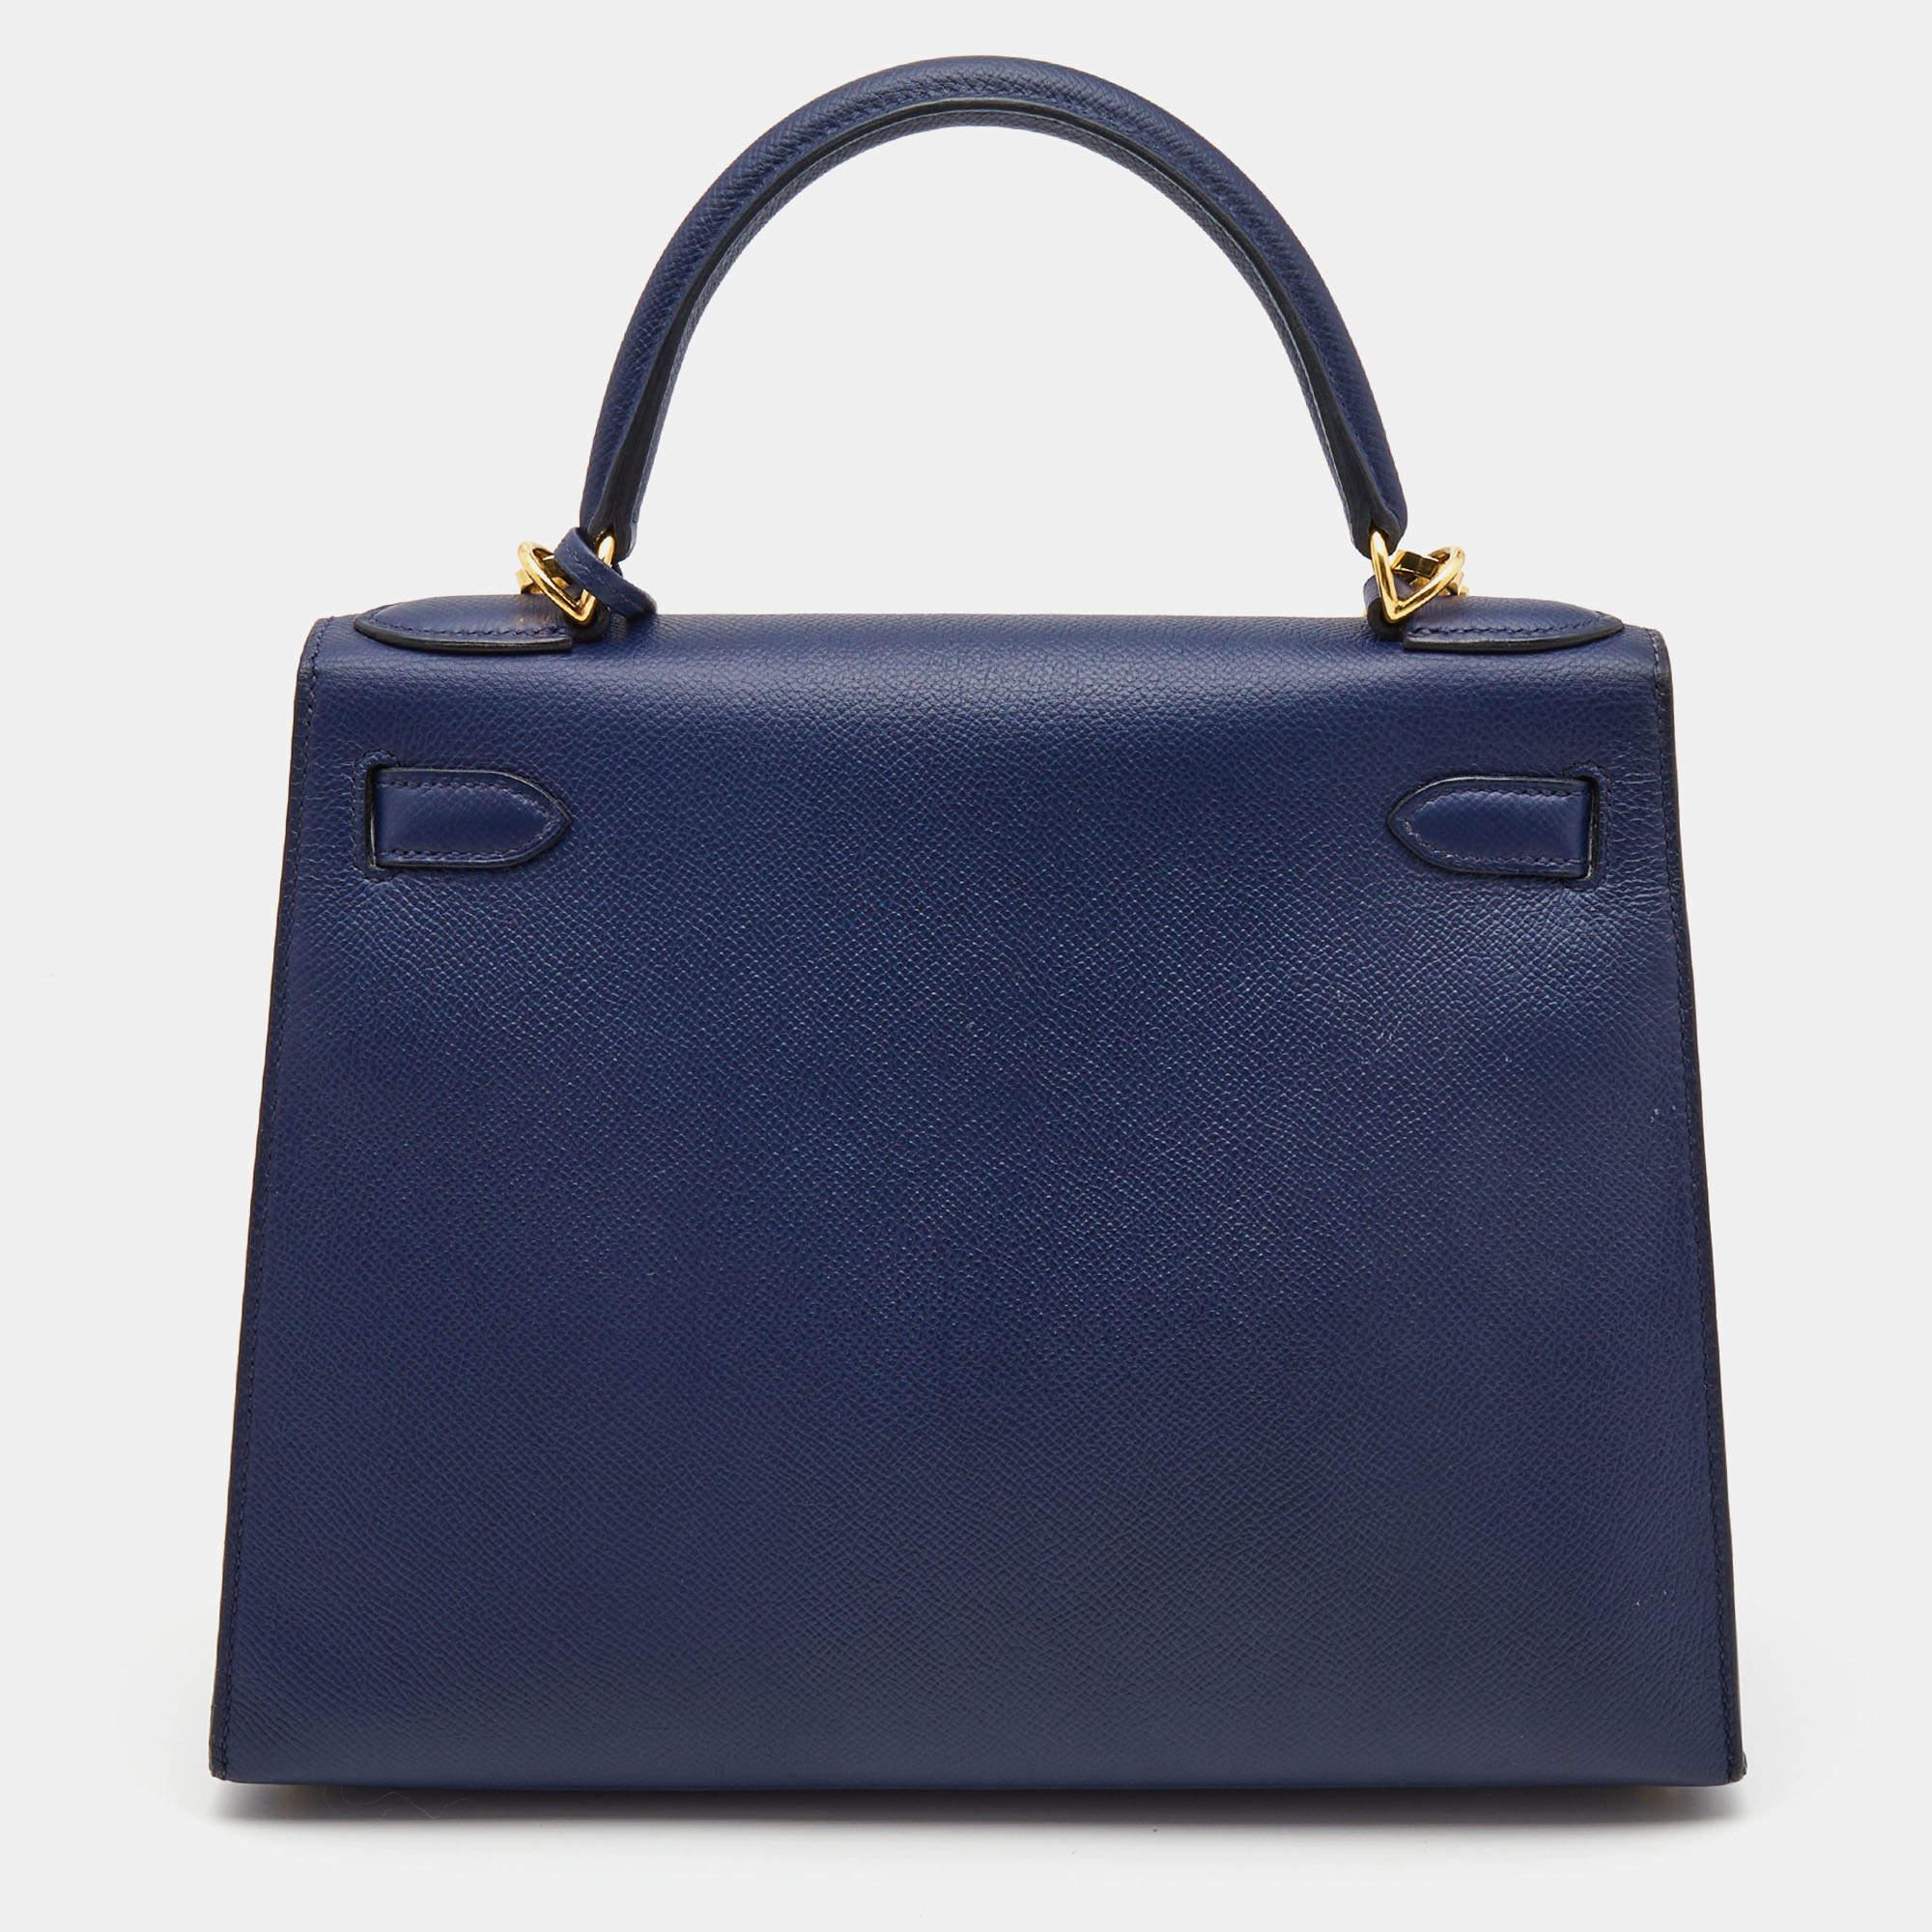 Your wait to own a Hermes Kelly Sellier is now over! It is carefully hand stitched to perfection and can fit in all your daily necessities and still hold shape. This beauty is crafted from fine leather and has gold finish hardware.

Includes: